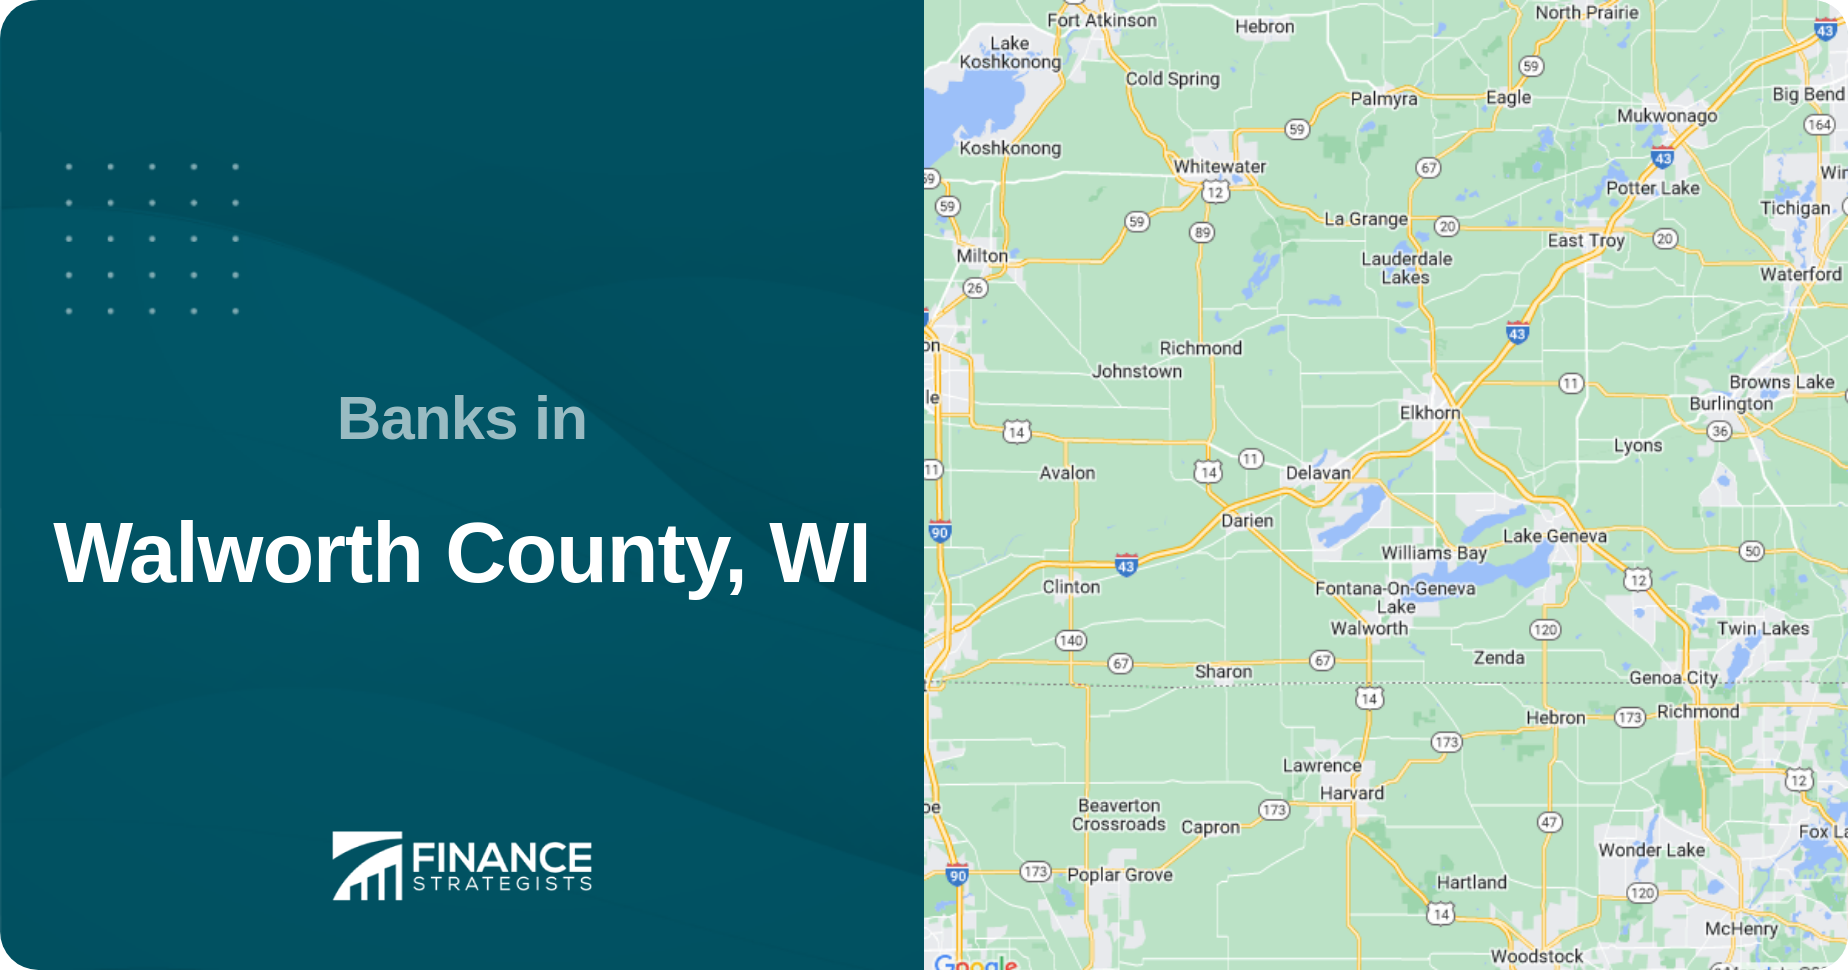 Banks in Walworth County, WI